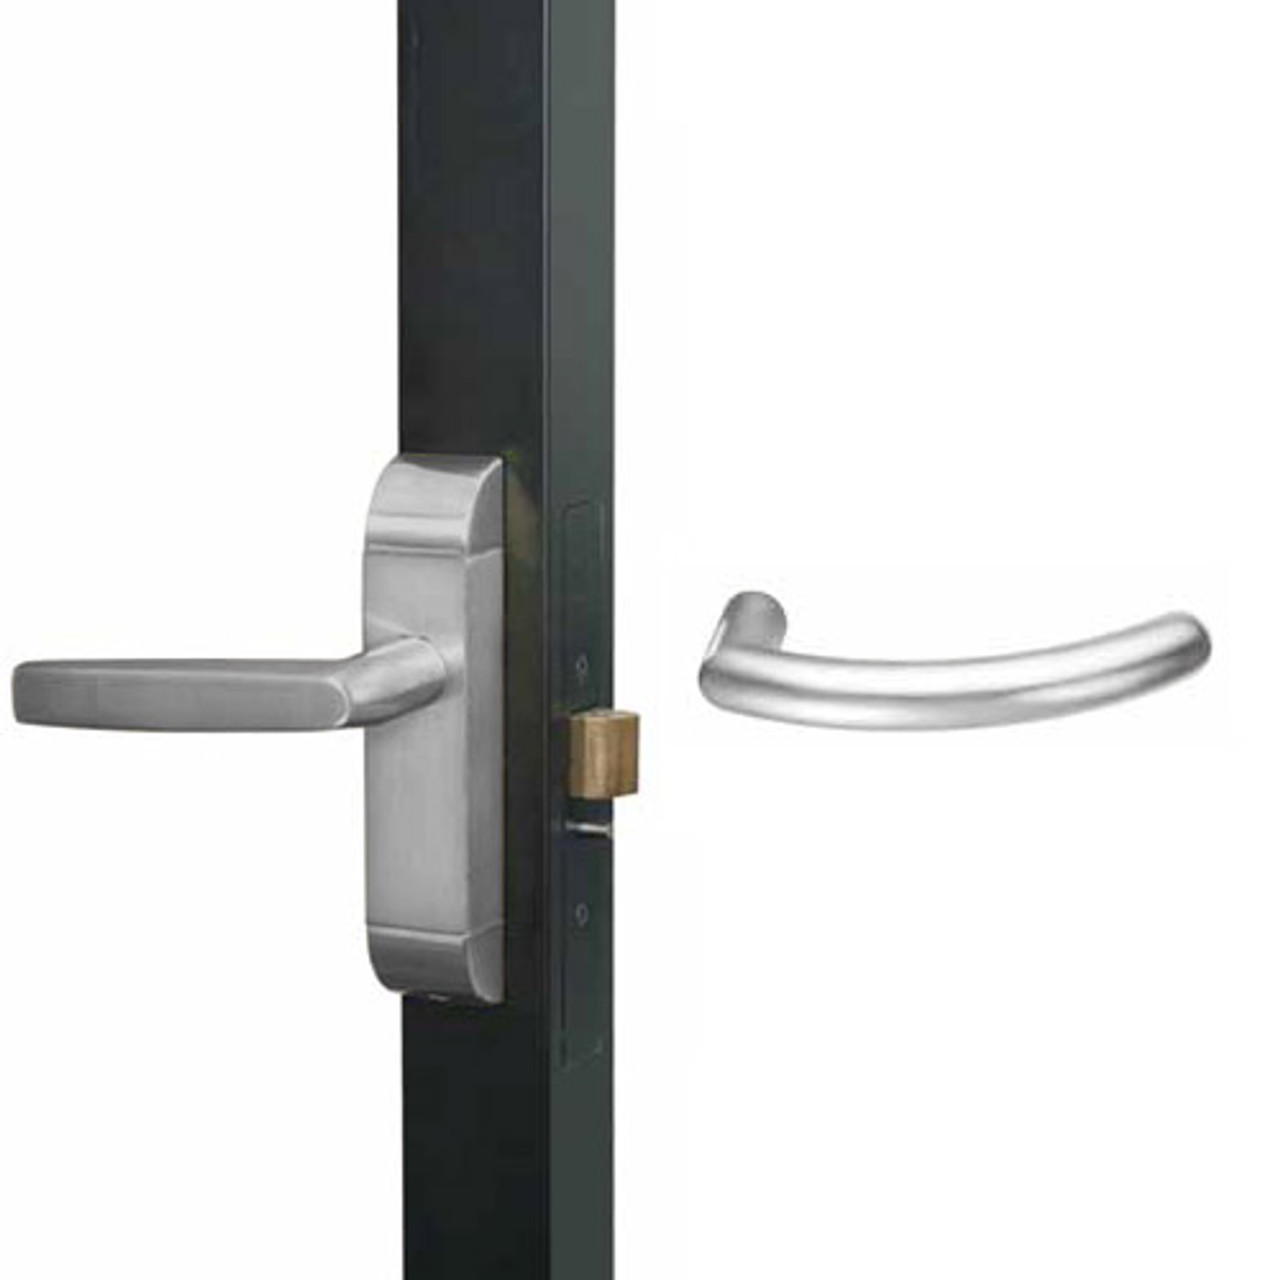 4600M-MG-632-US32 Adams Rite MG Designer Deadlatch handle in Bright Stainless Finish